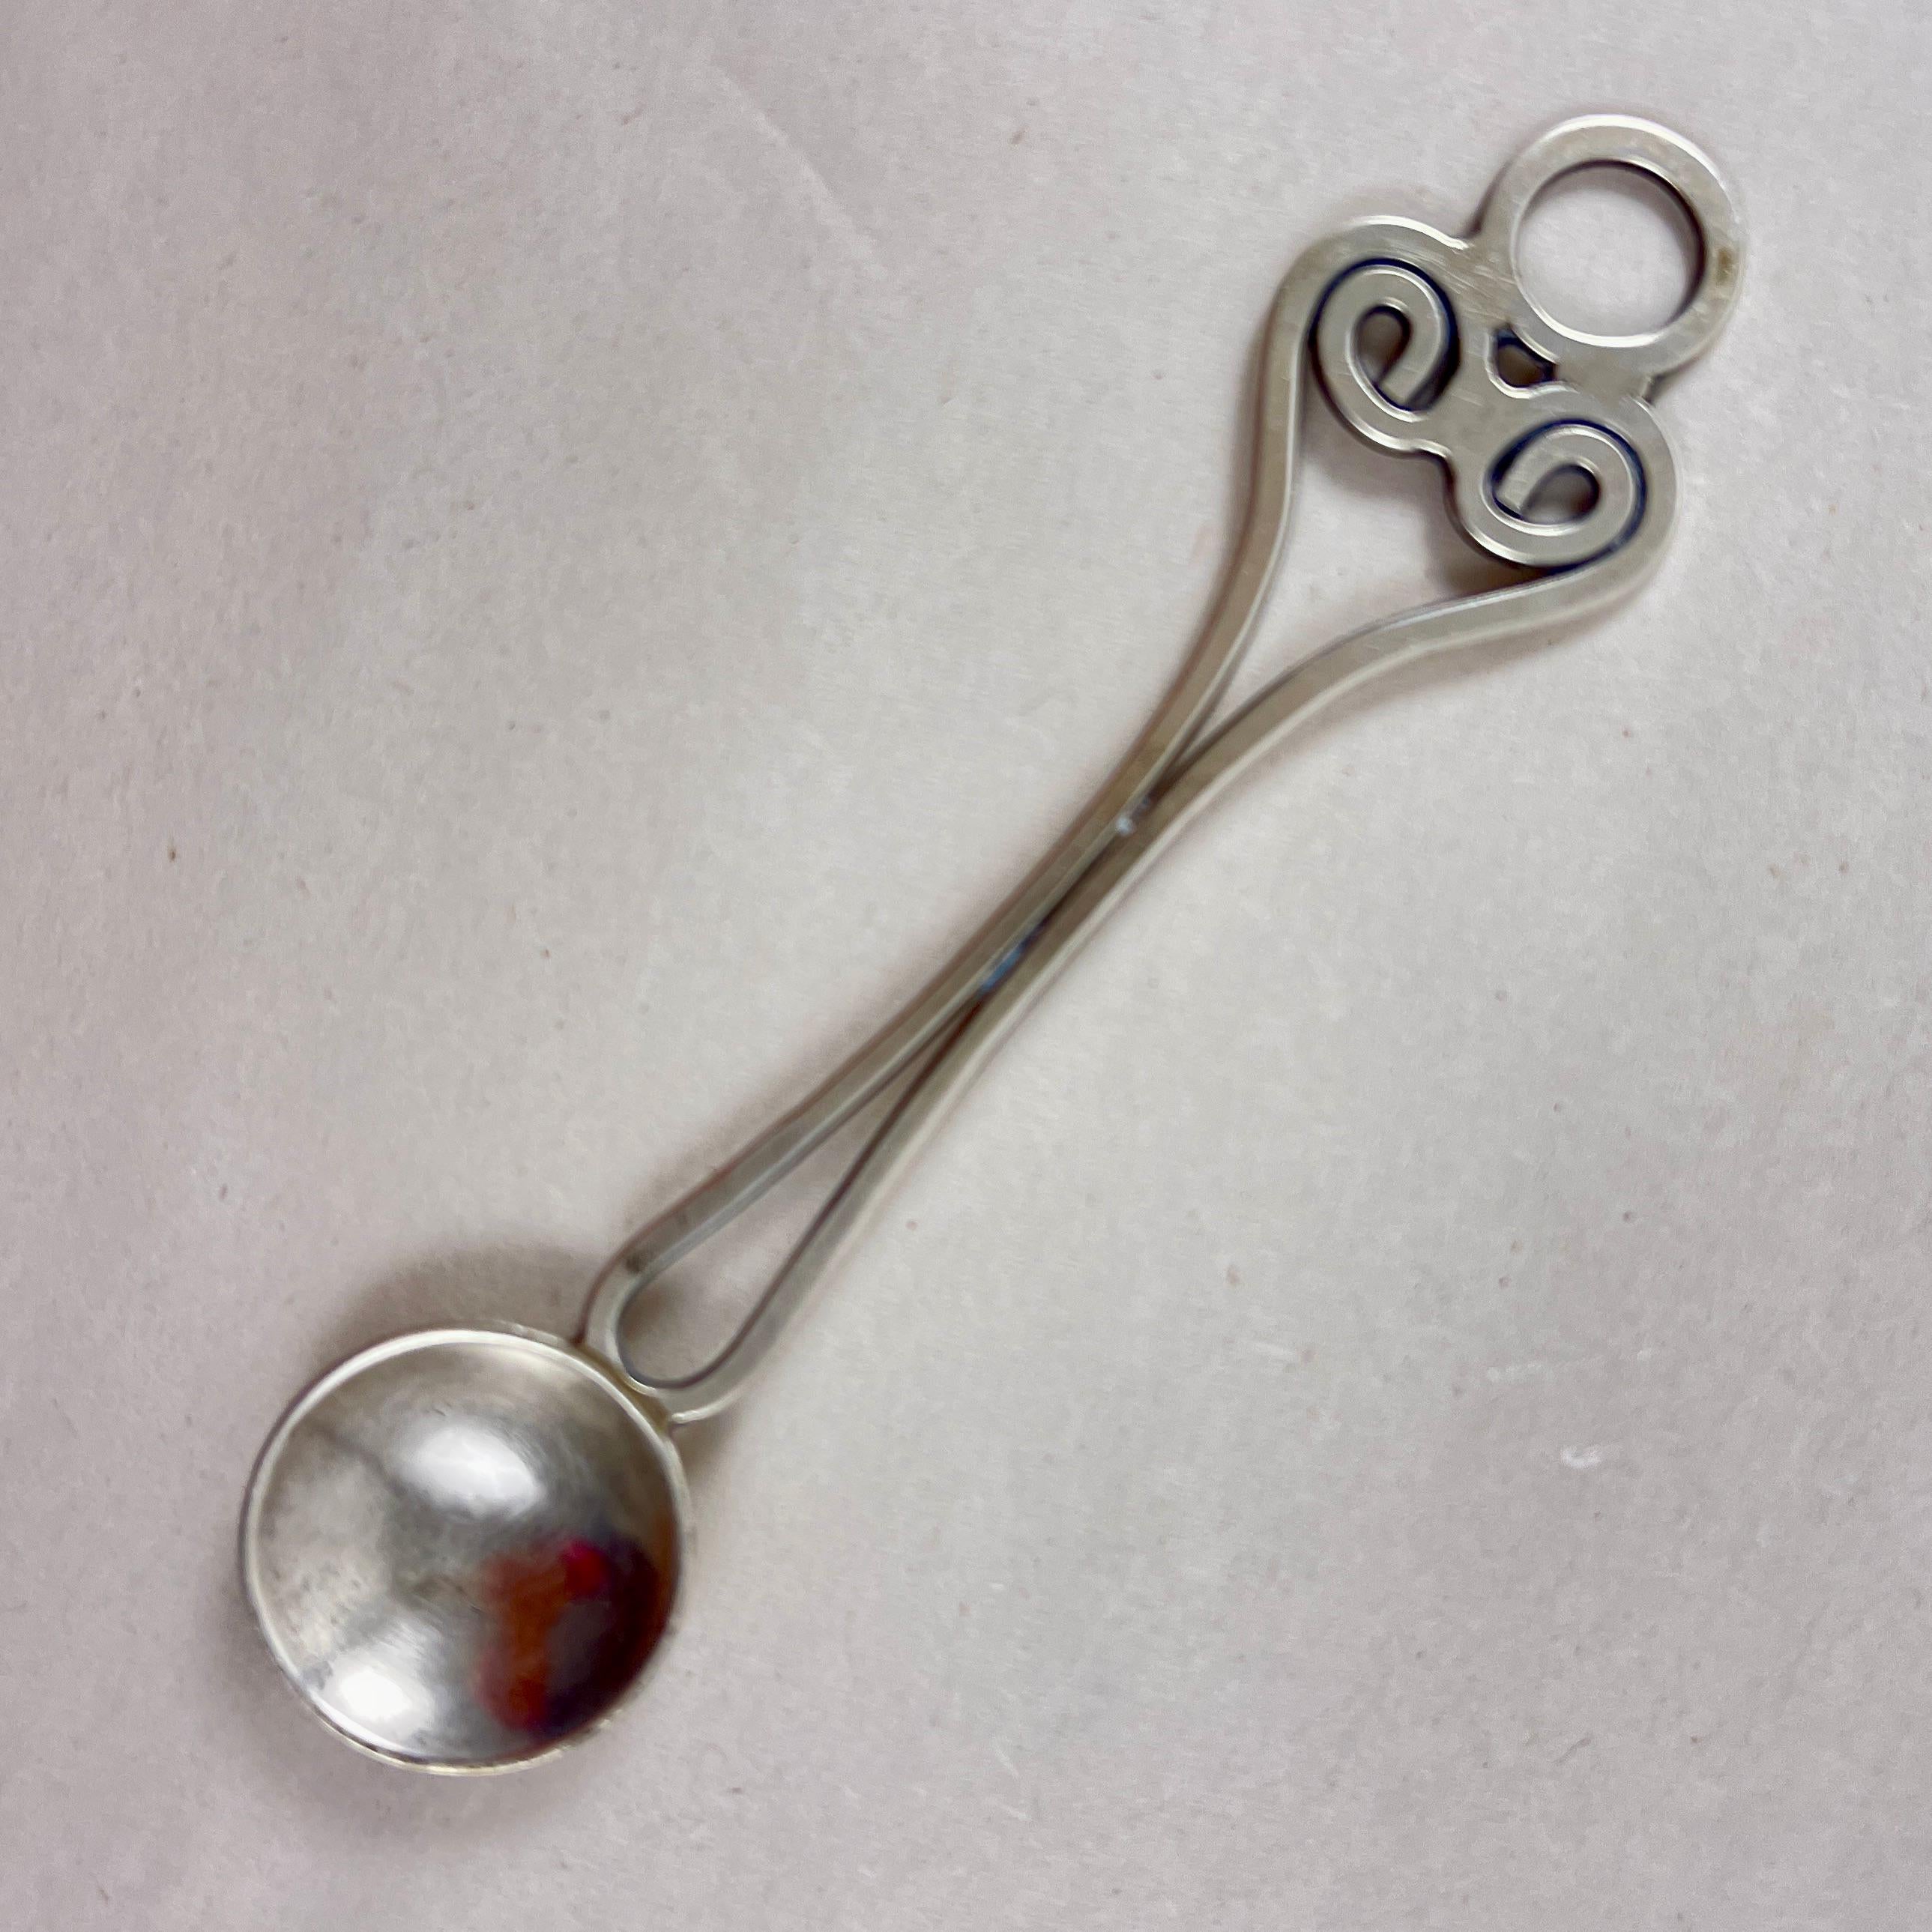 From the Silversmithing Studio of the late artisan Anthony DiRienzi, a sterling silver spoon, Philadelphia - circa early 1980s.

American Arts & Crafts in the Art Nouveau style, entirely hand-made of .925 Silver.
Perfect for condiments, nuts, or